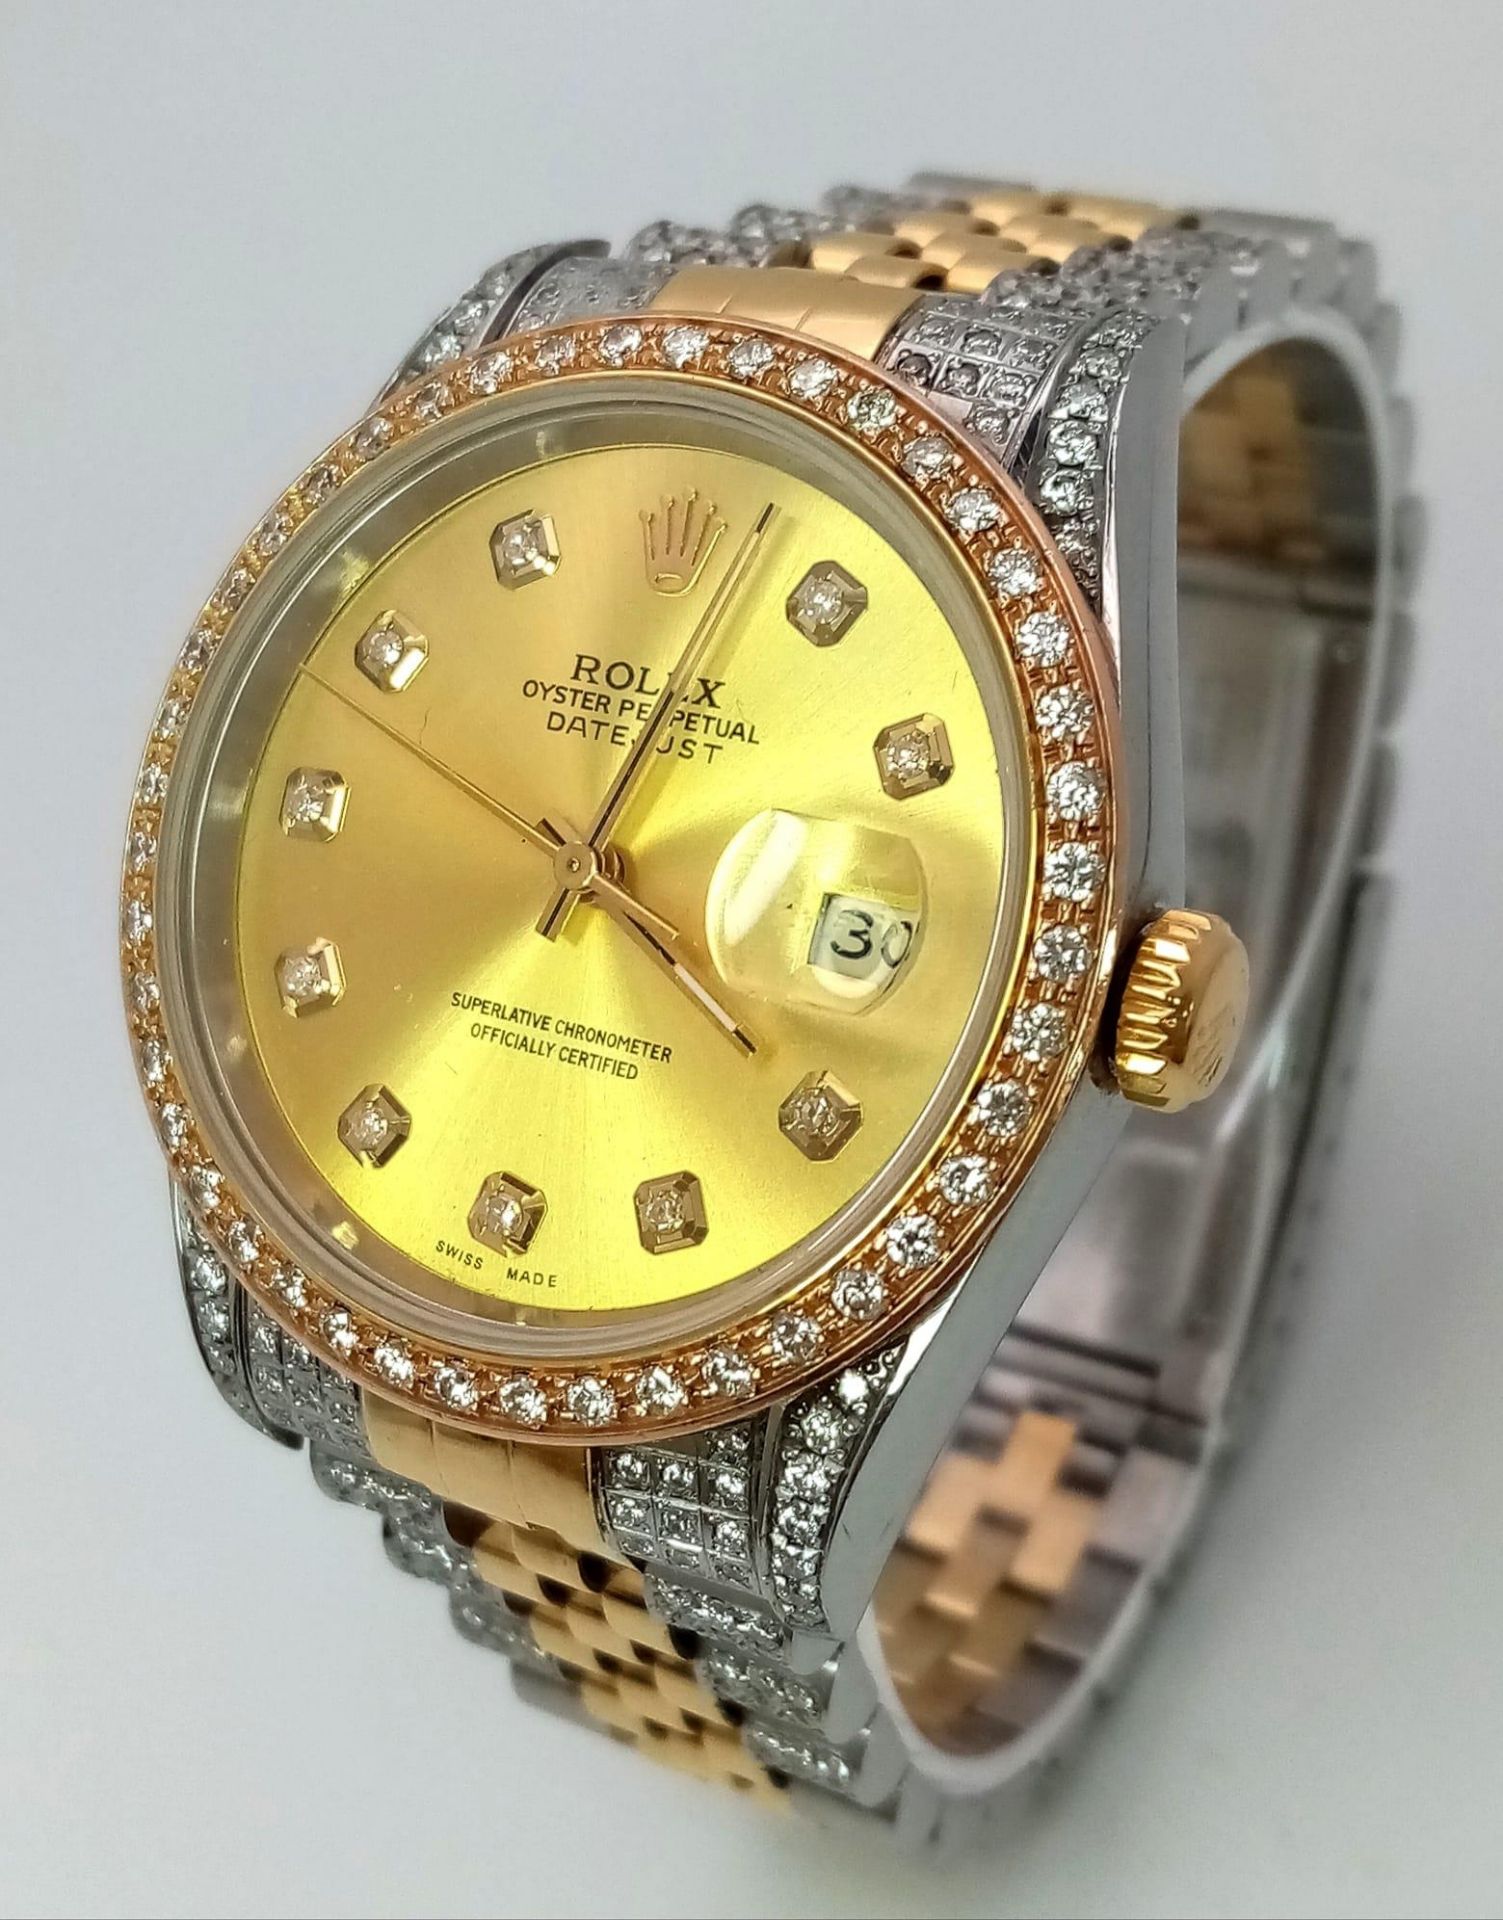 A Rolex Oyster Perpetual Datejust Bi-Metal Diamond Gents Watch. Gold, stainless steel and diamond - Image 2 of 15